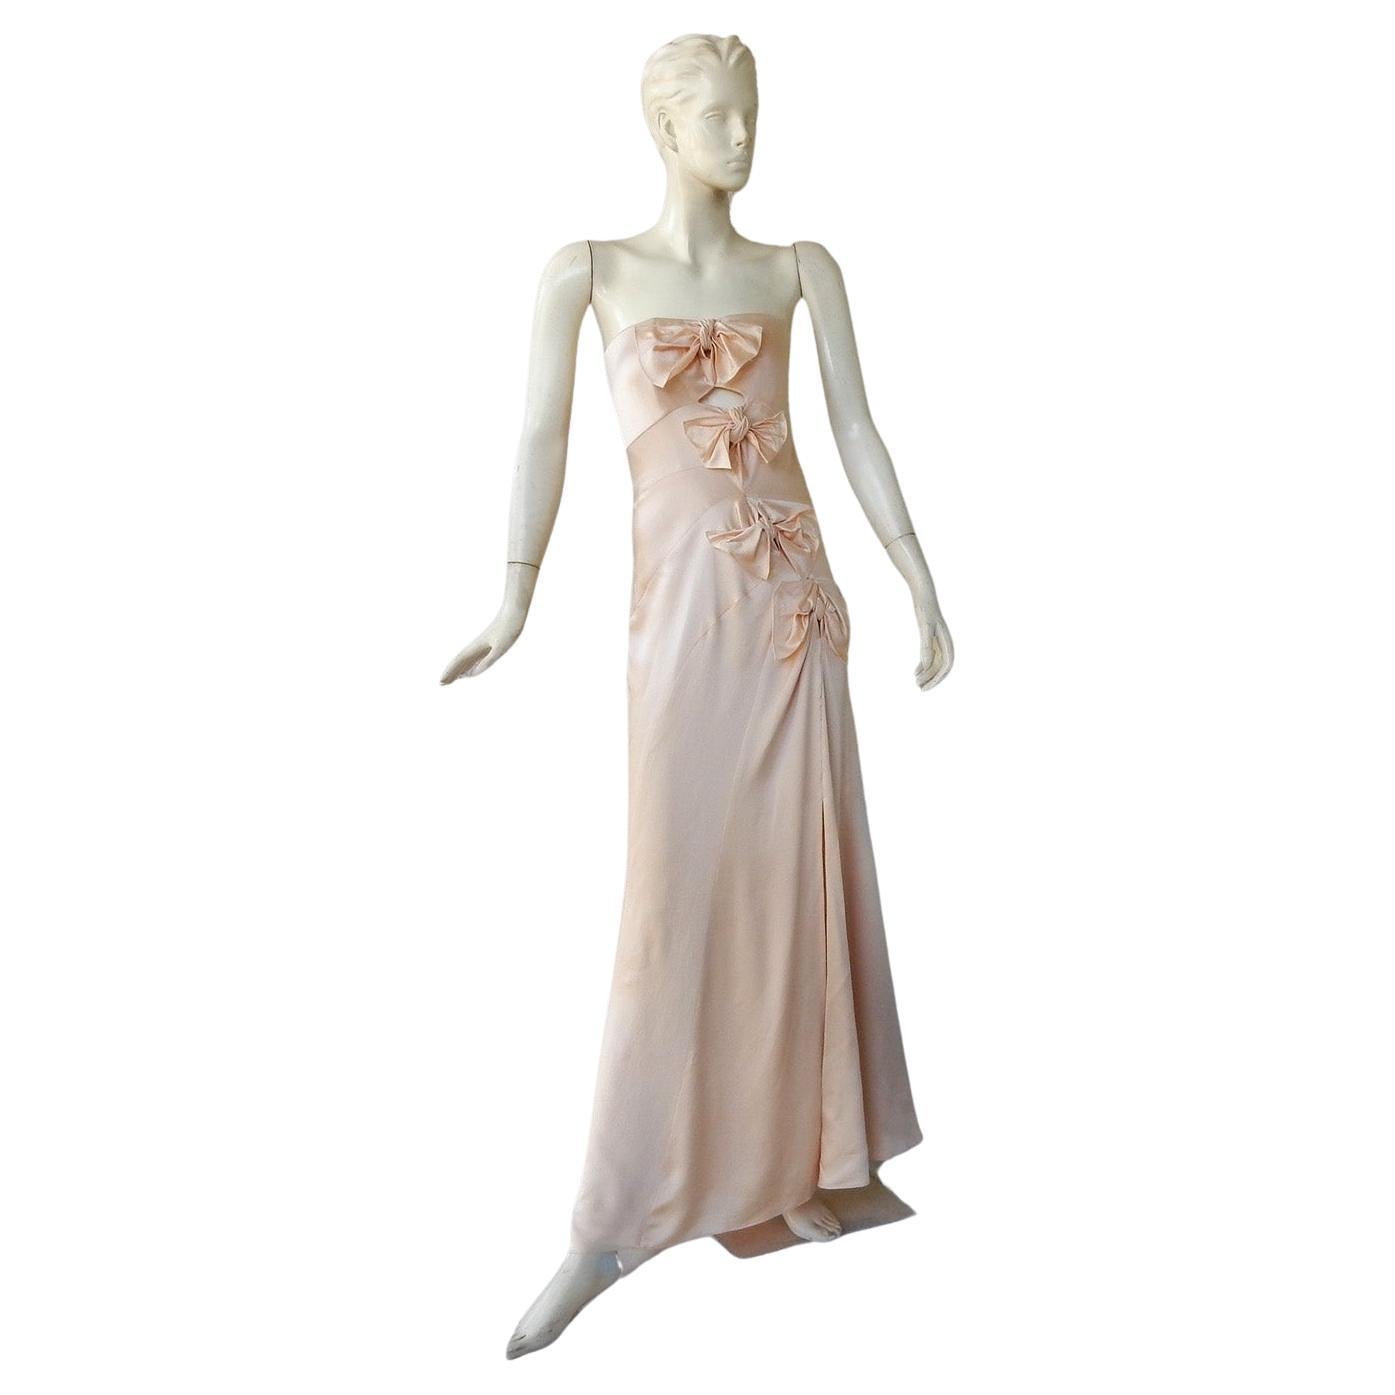 Christian Dior by John Galliano Strapless Old Hollywood Style Bow Dress Gown For Sale